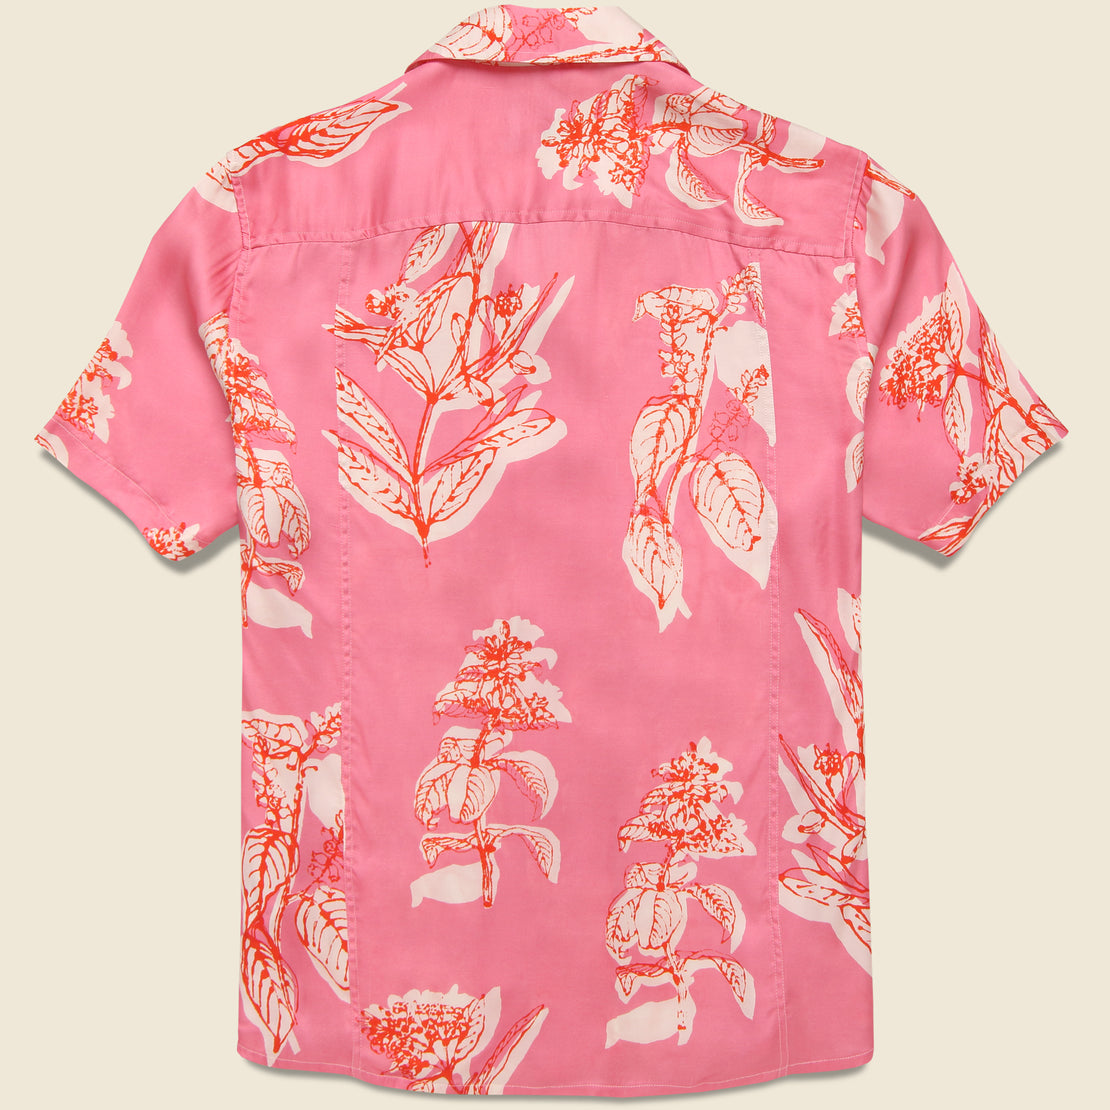 Viscose Camp Shirt - Pink - Corridor - STAG Provisions - Tops - S/S Woven - Floral